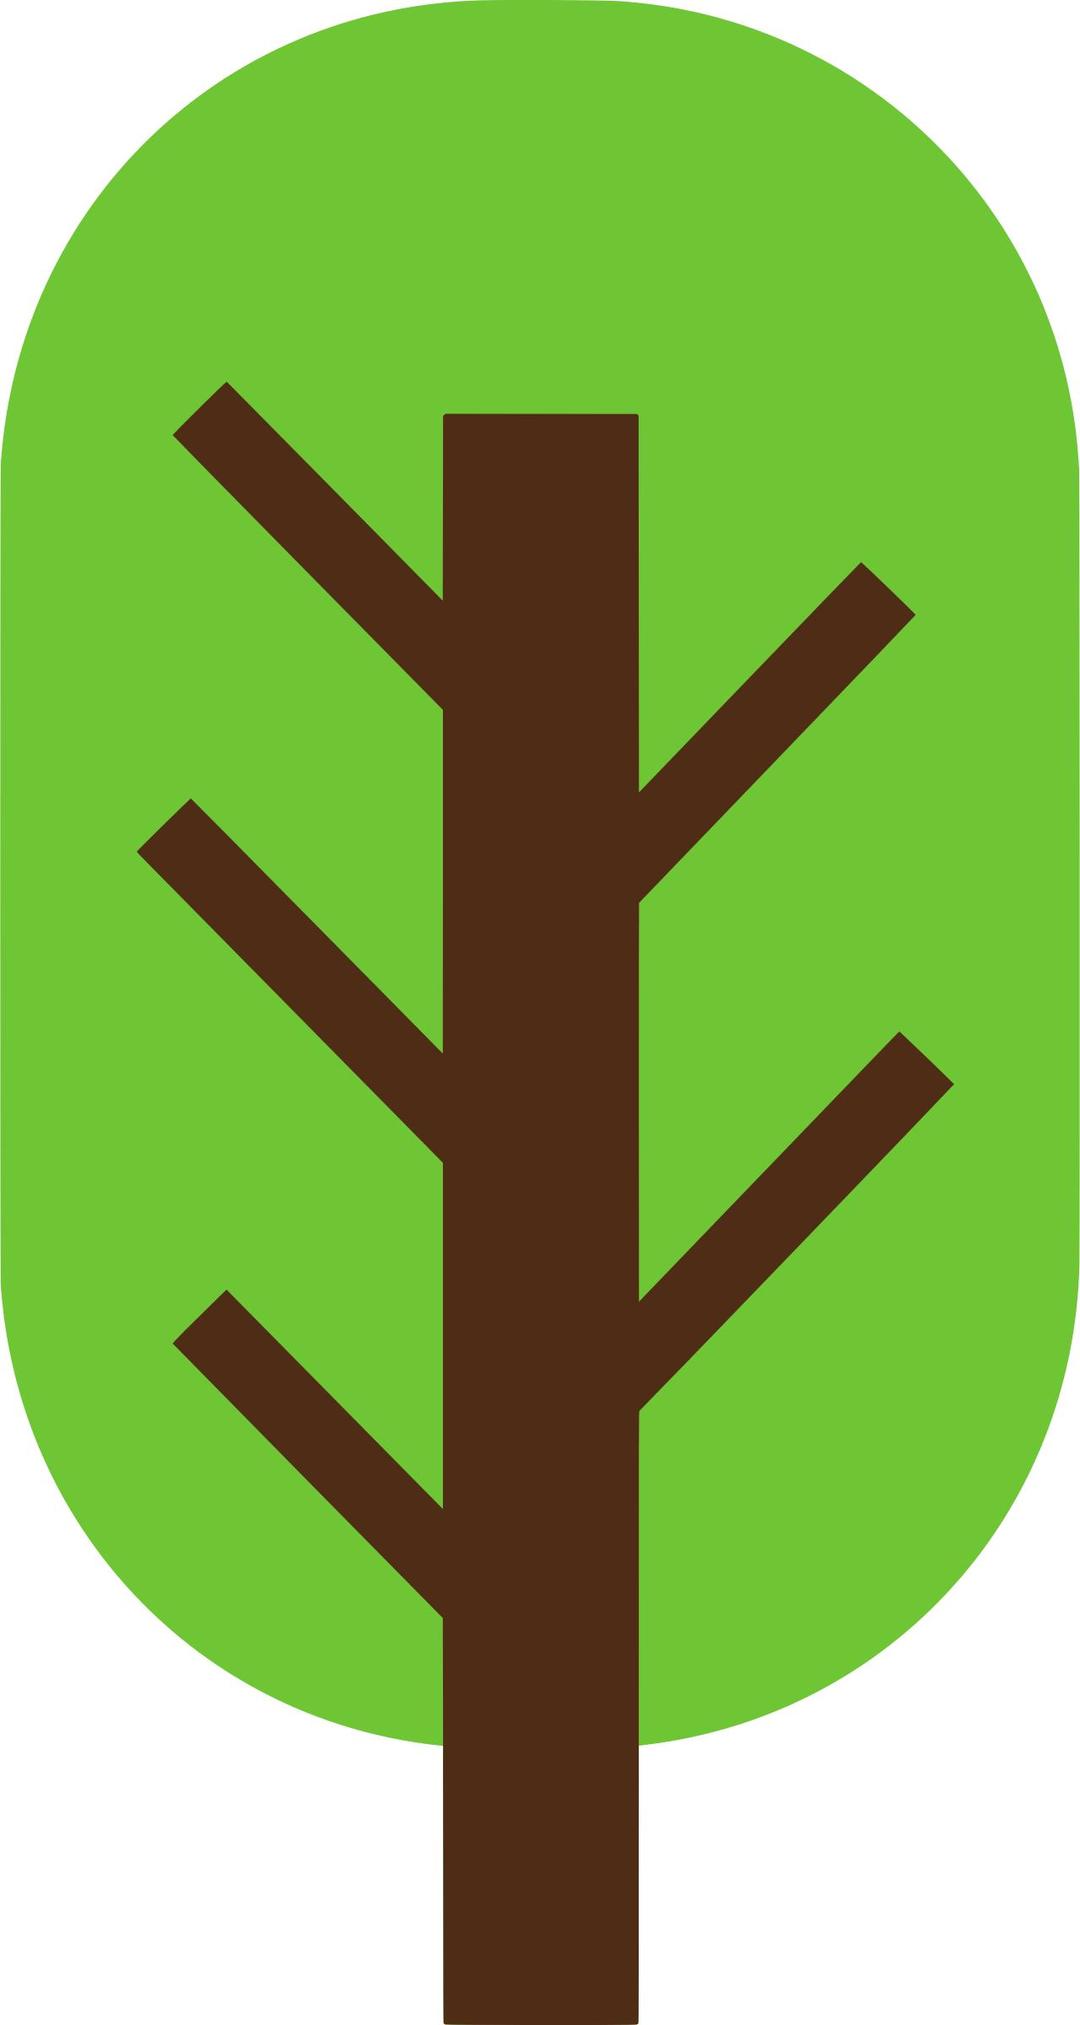 Square tree vectorized png transparent